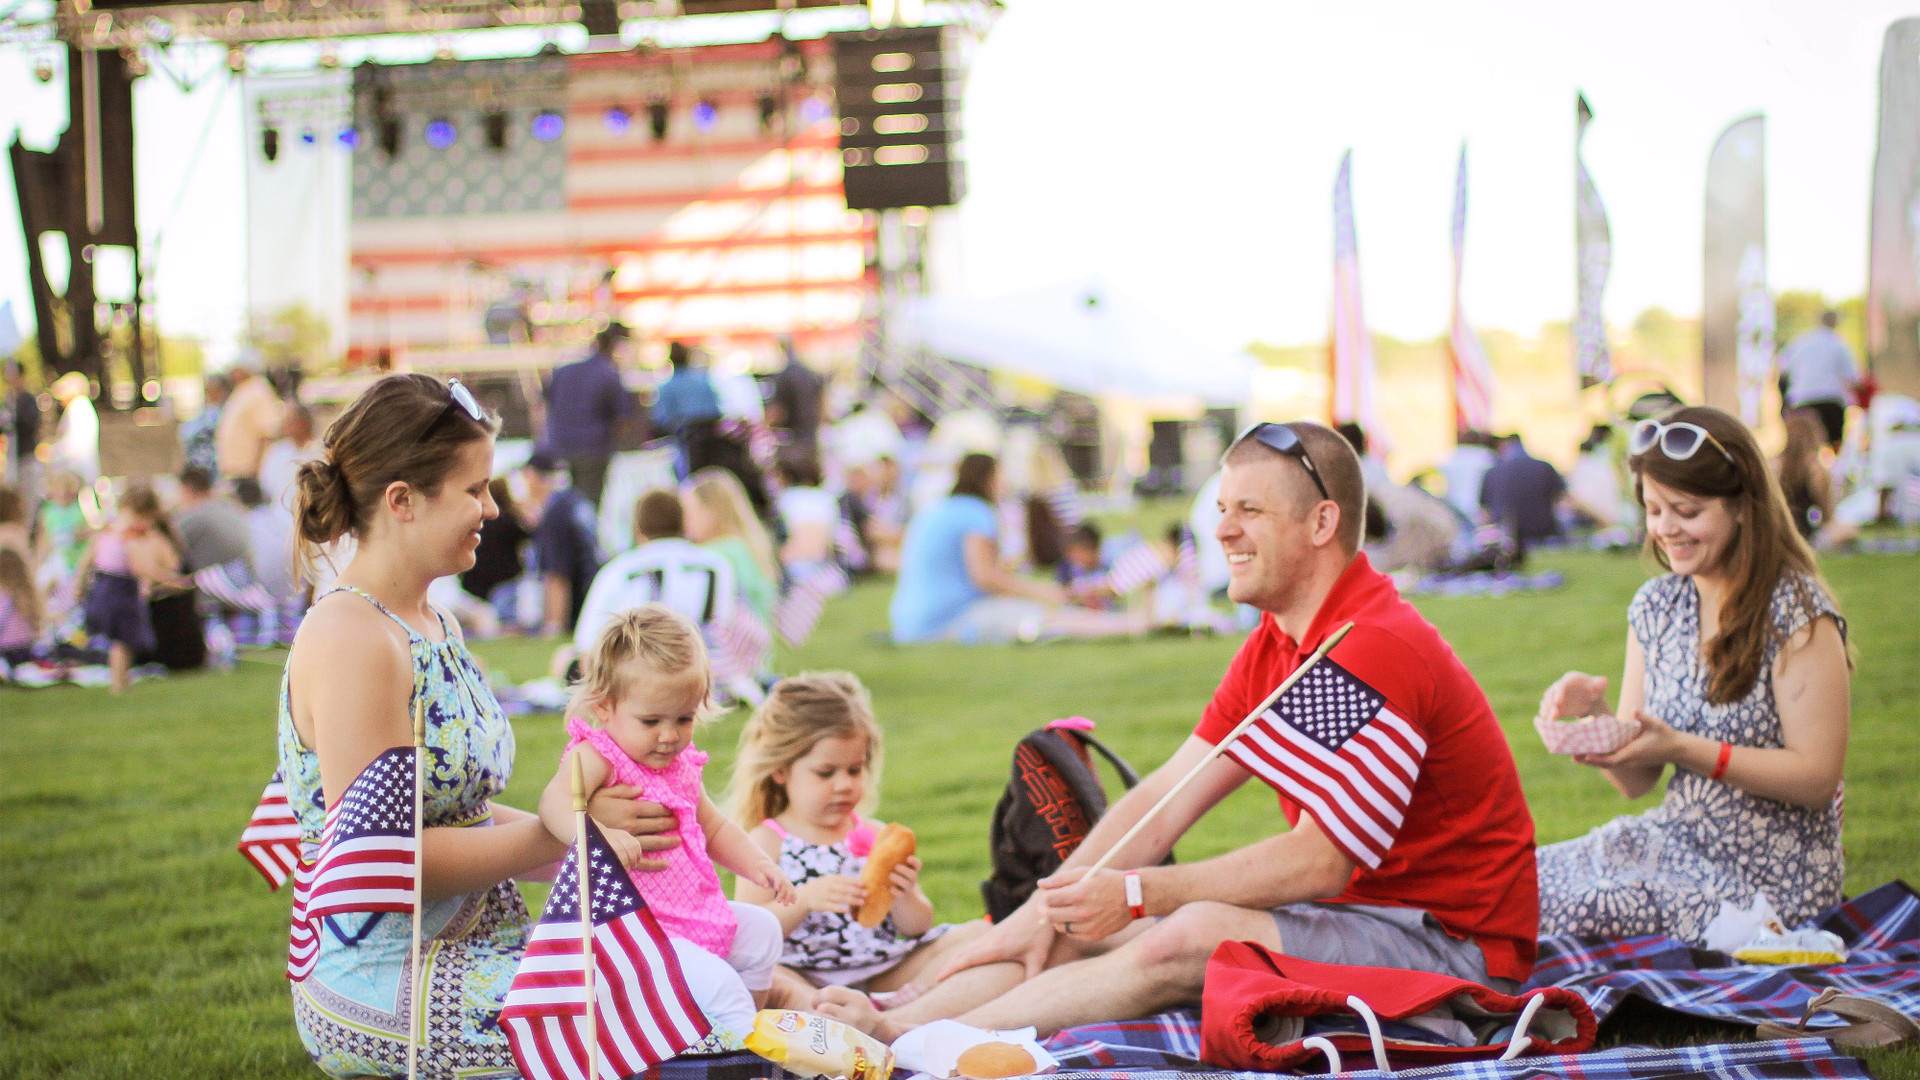 In honor of U.S. military, Westgate Resorts awards 1,500 free vacations to military families | Westgate Resorts